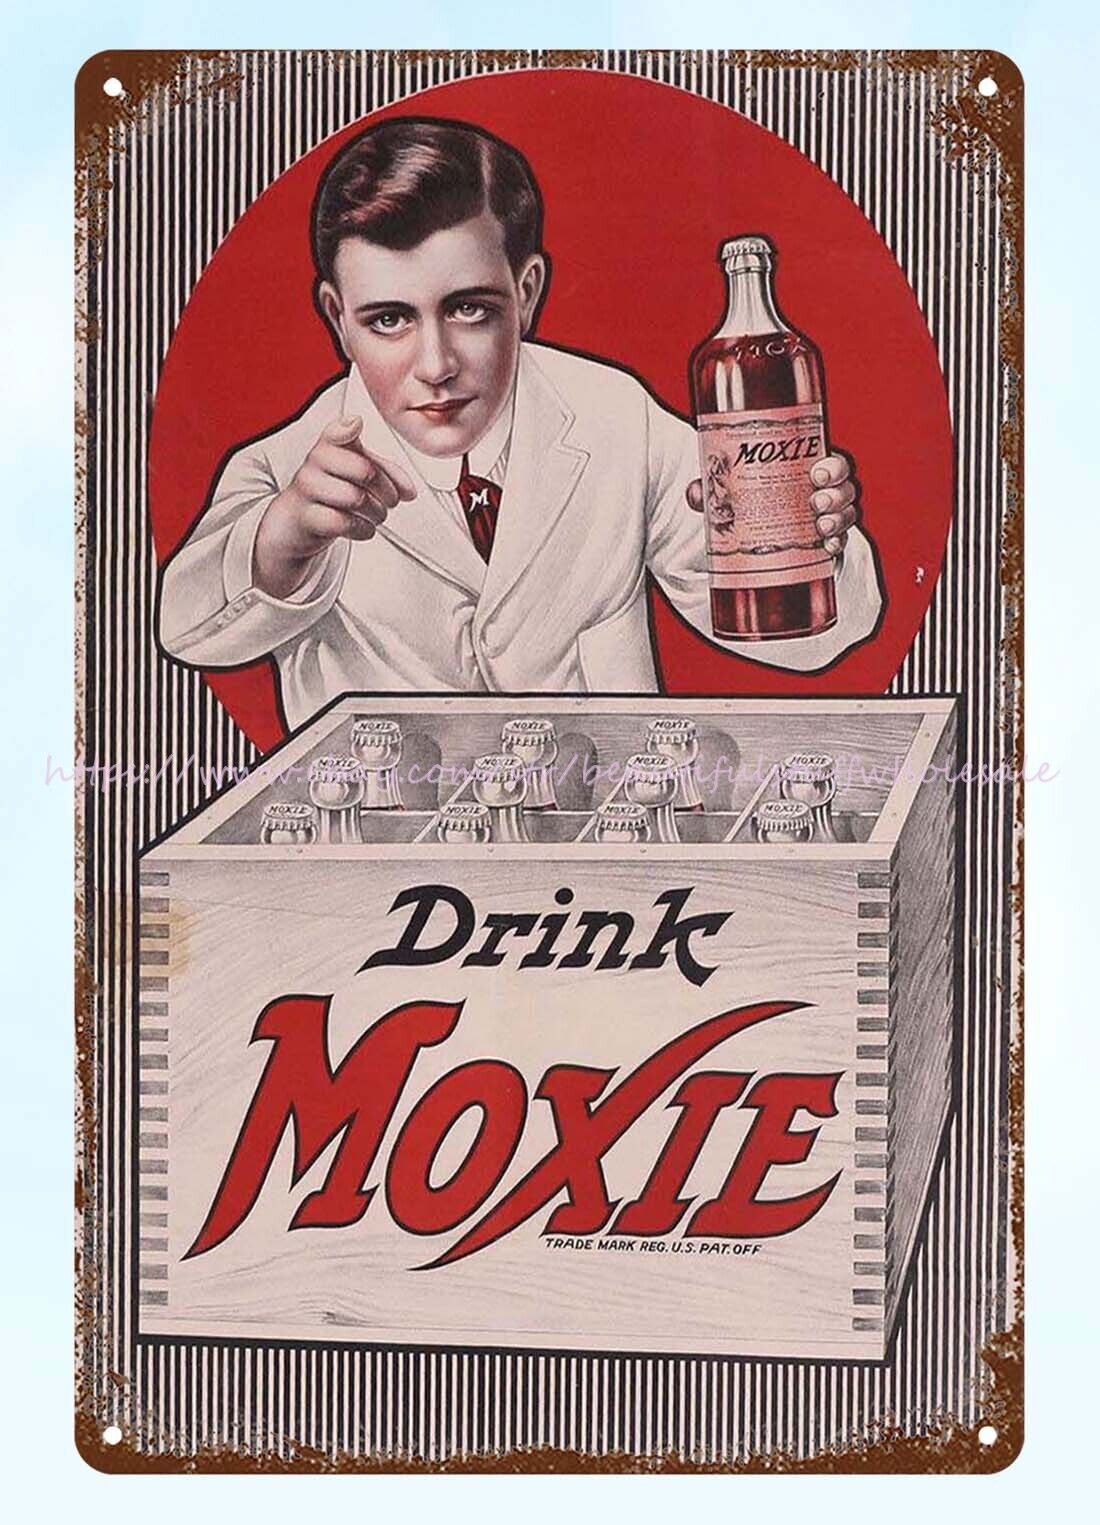 EARLY DRINK MOXIE FRAMED POSTER metal tin sign internal decoration